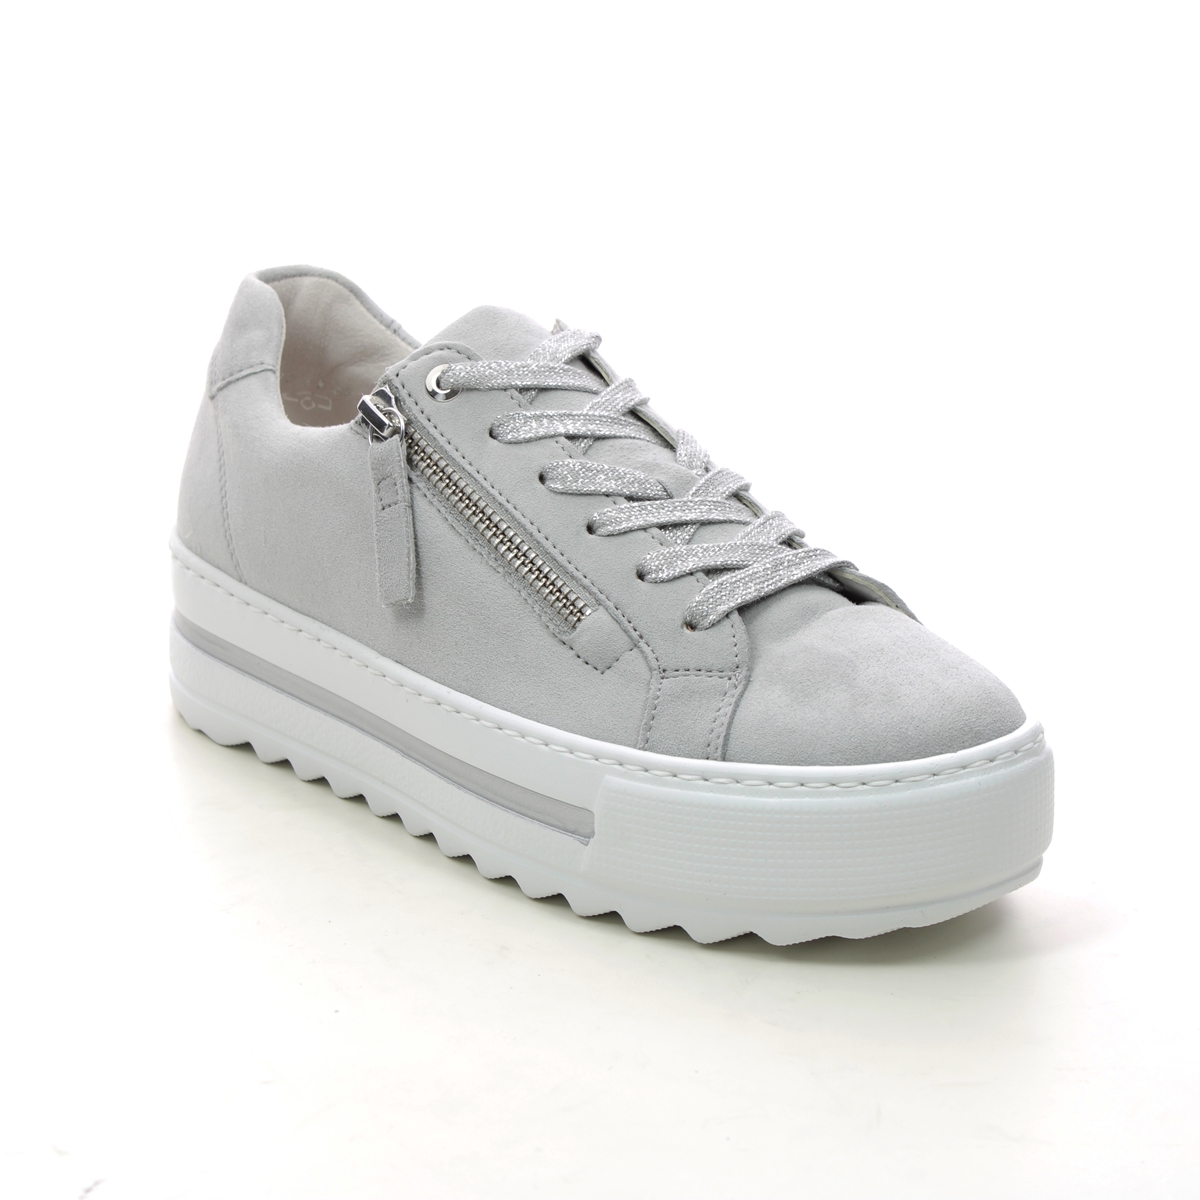 Gabor Heather Light Grey Suede Womens trainers 26.498.40 in a Plain Leather in Size 6.5